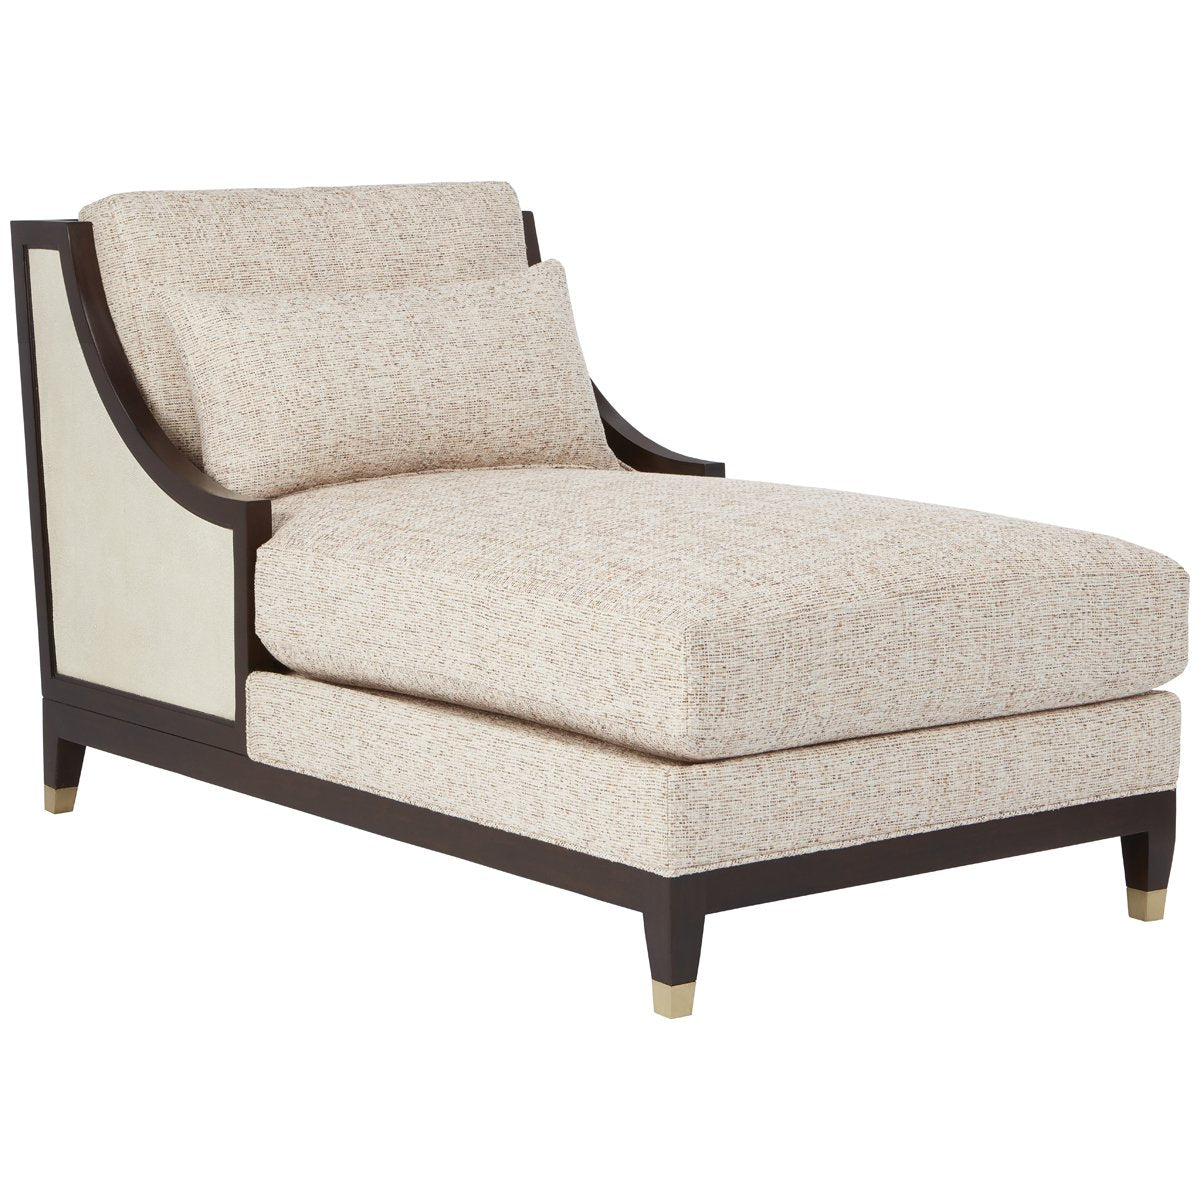 Currey and Company Evie Chaise